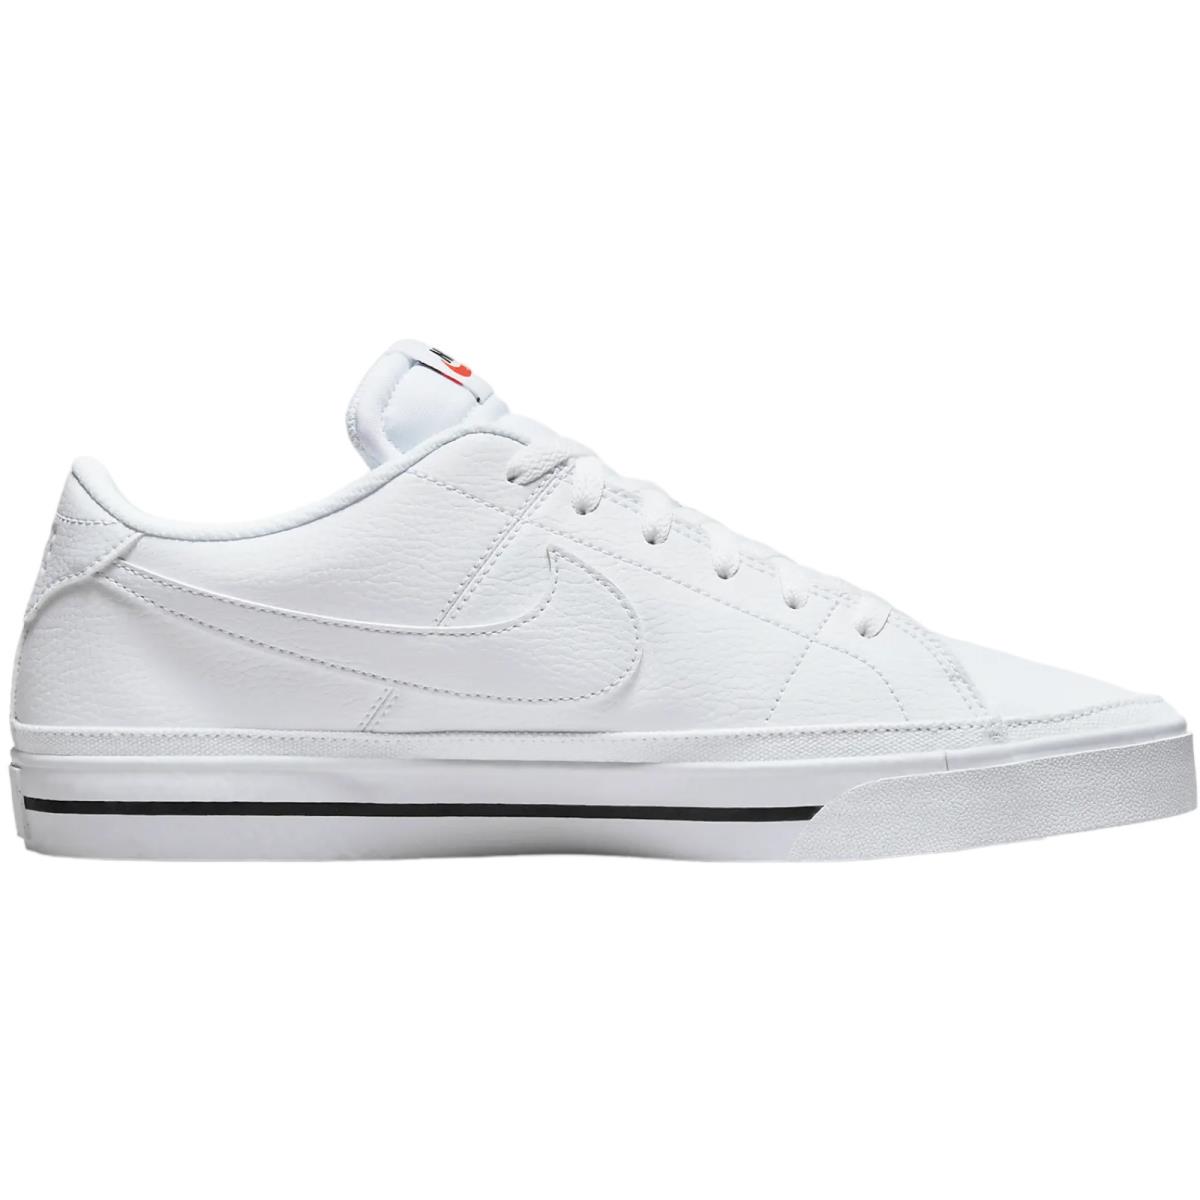 Nike Court Legacy Men`s Casual Shoes All Colors US Sizes 7-14 White/Black/White